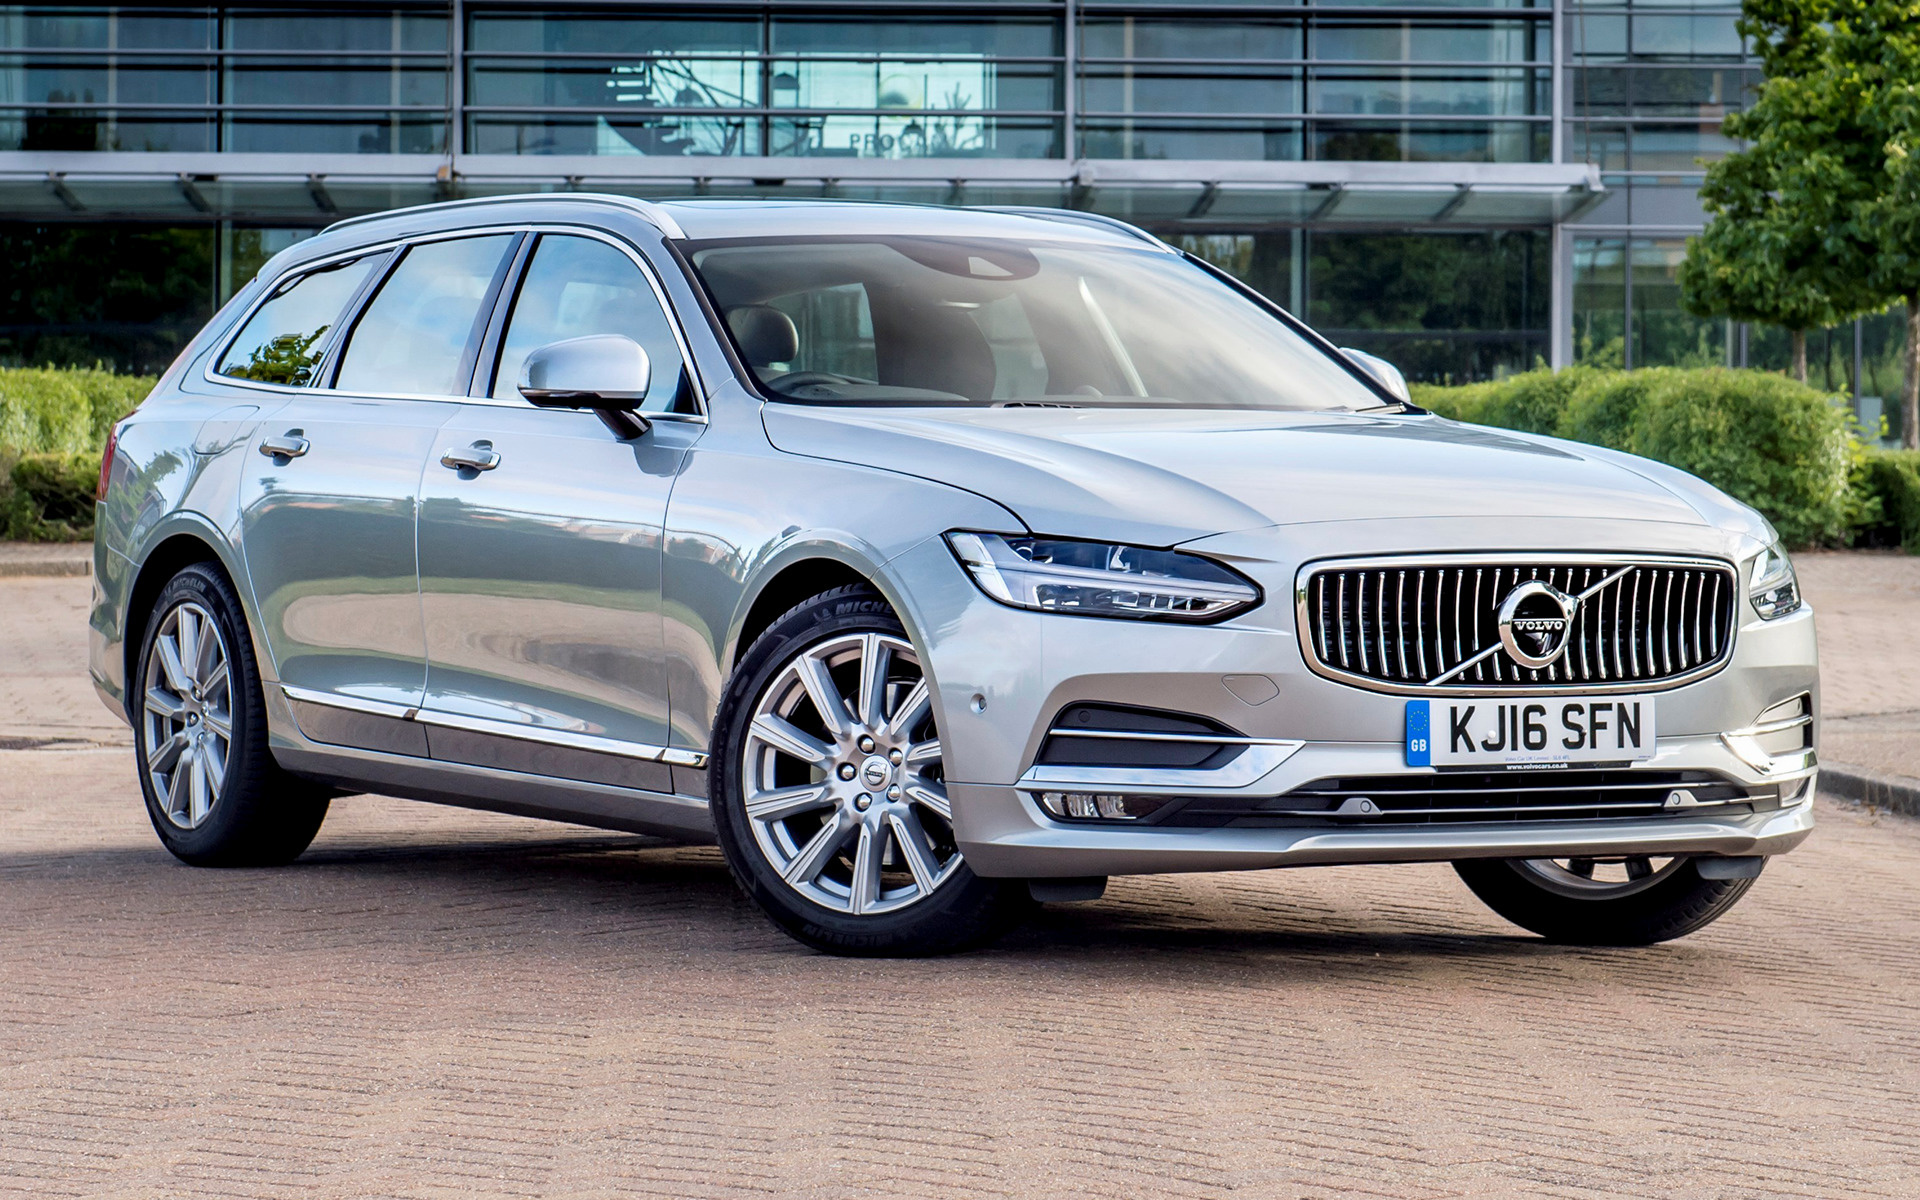 2022 Volvo V90 Inscription UK Wallpapers and HD Images 